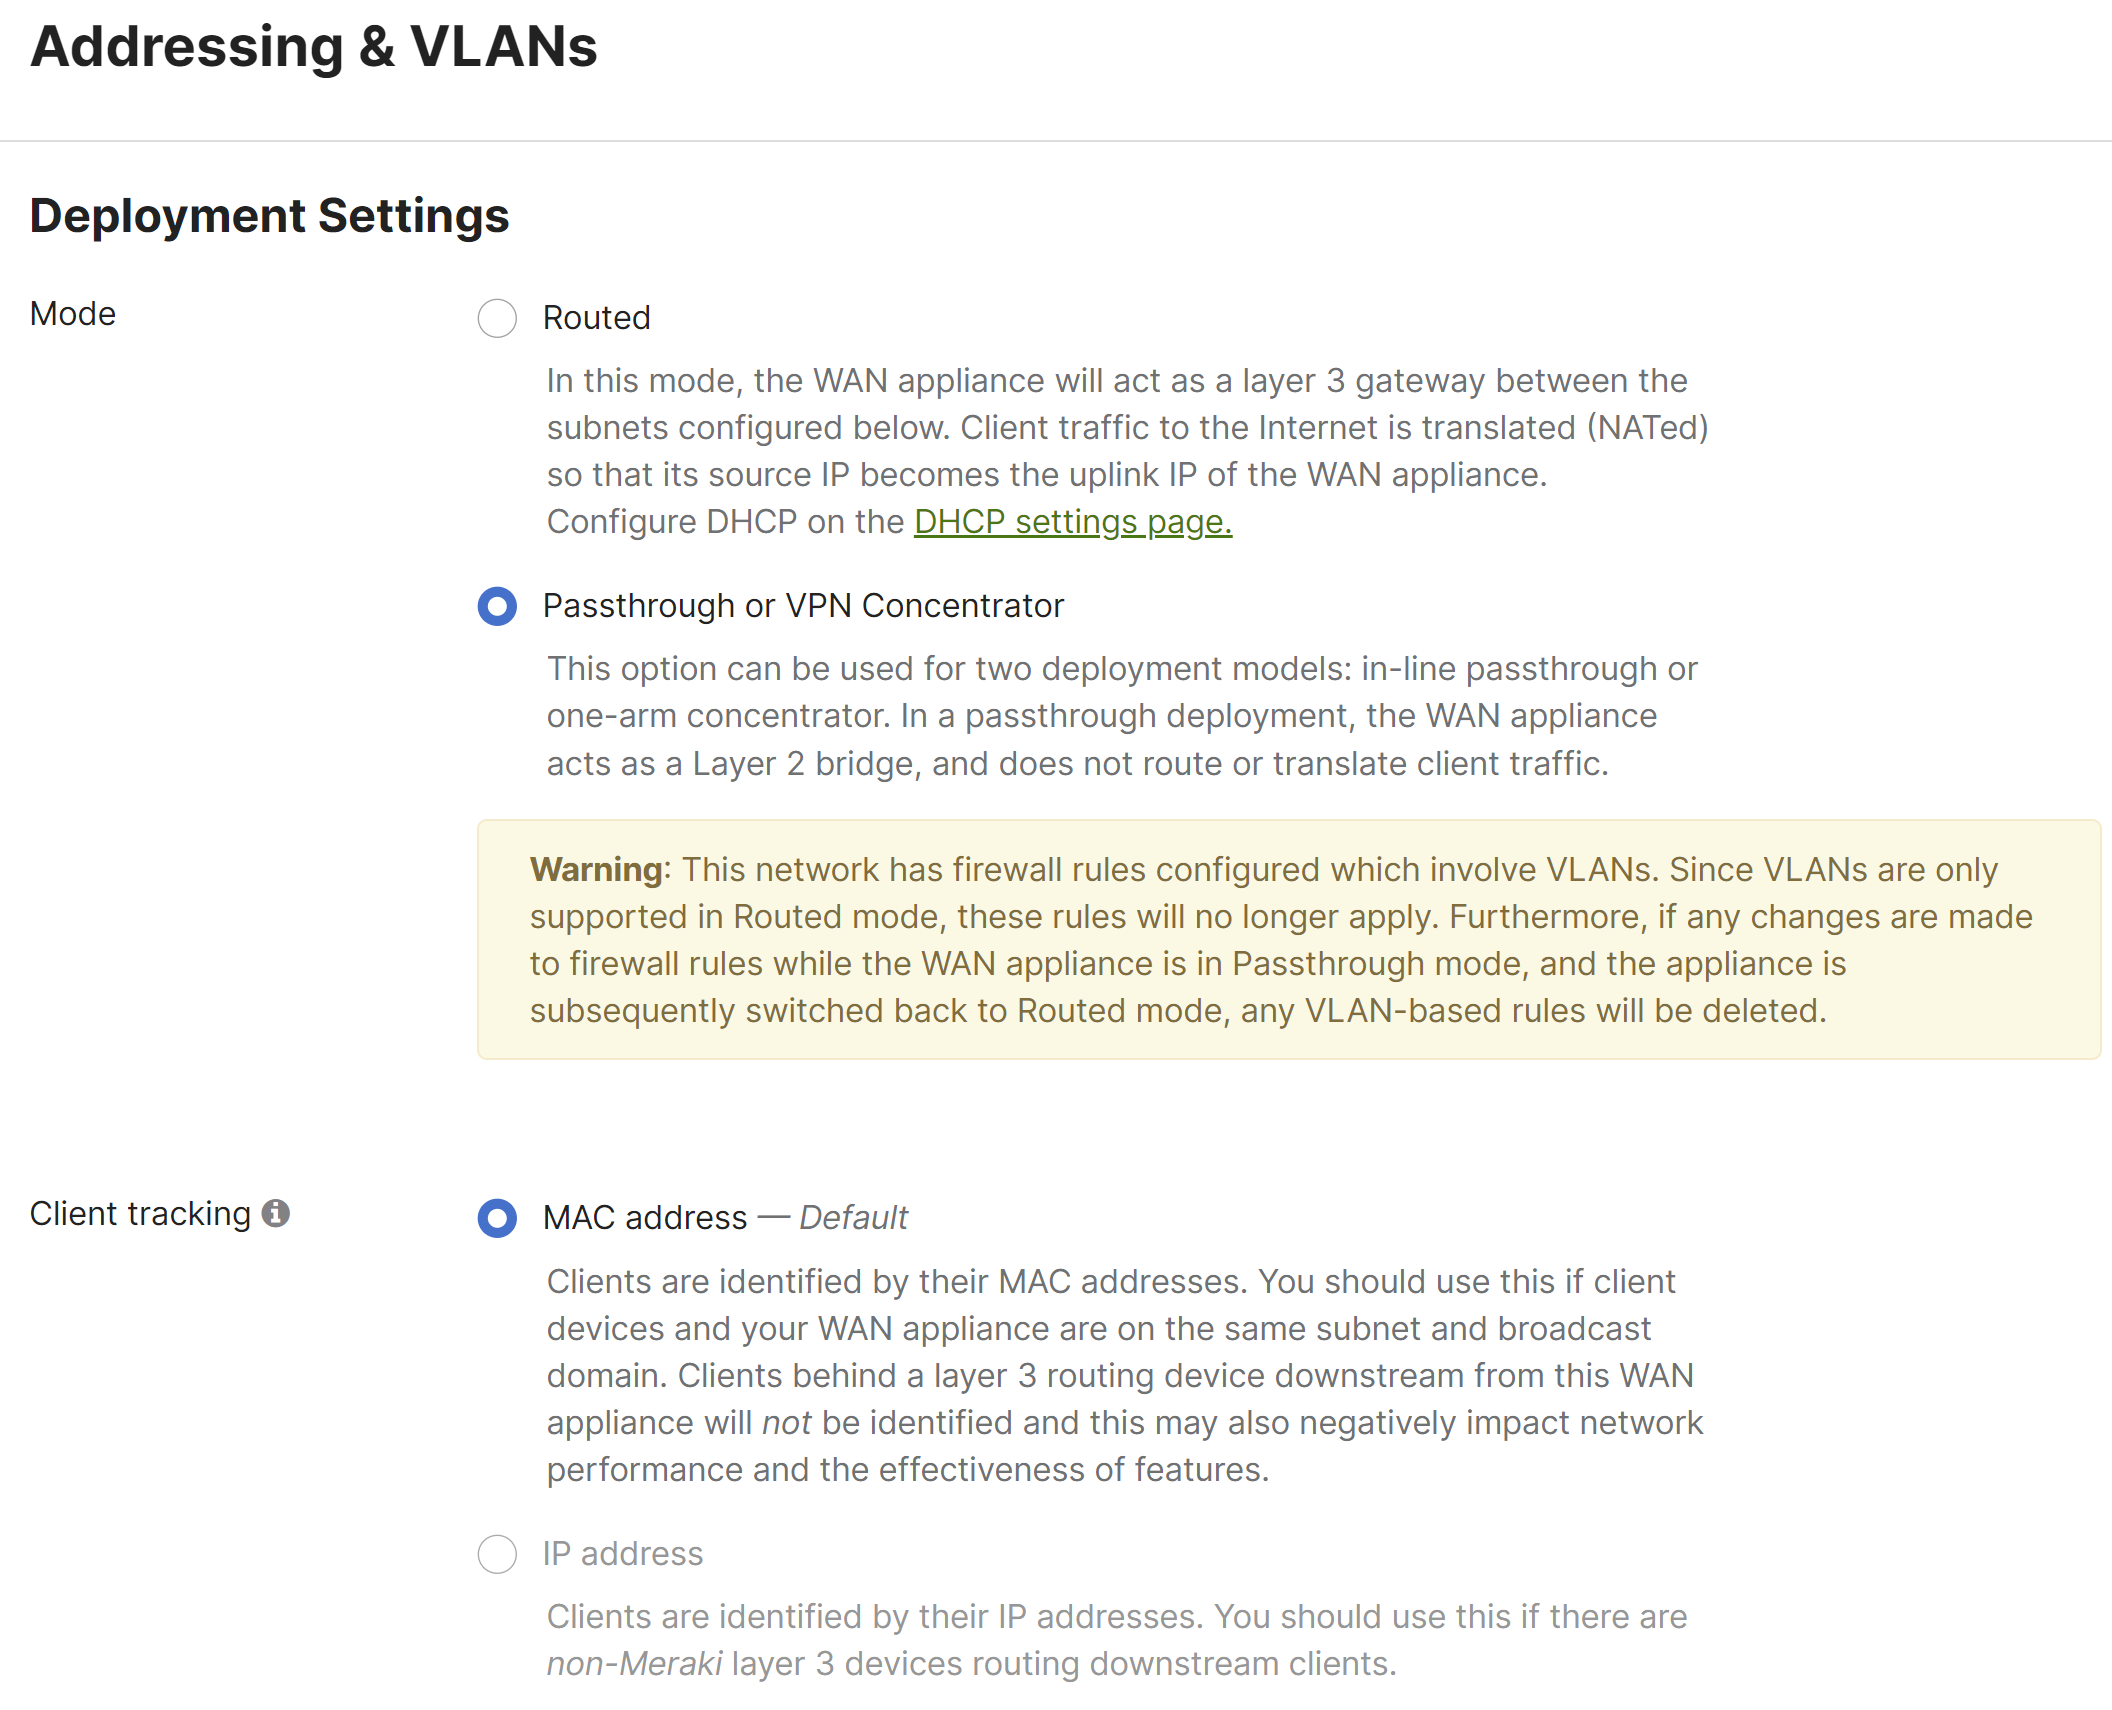 Addressing and VLANs Routed or Passthrough VPN concentrator Deployment Mode